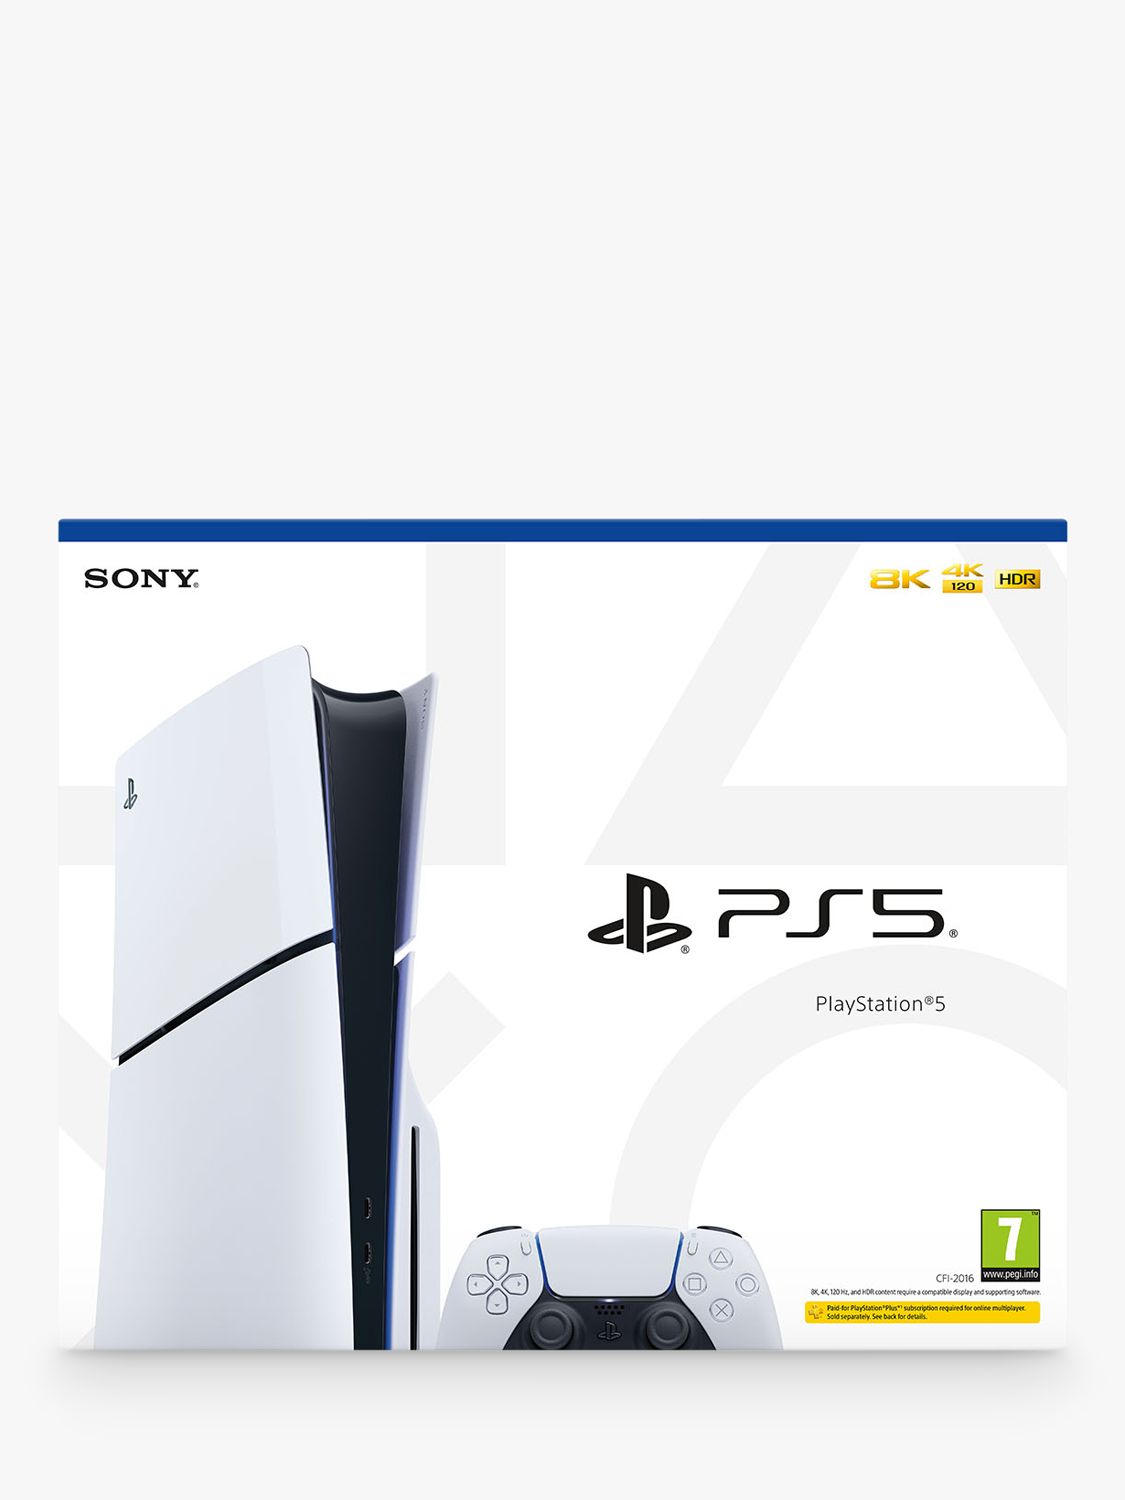 PlayStation 5 (Model Group - Slim) Console with DualSense Controller